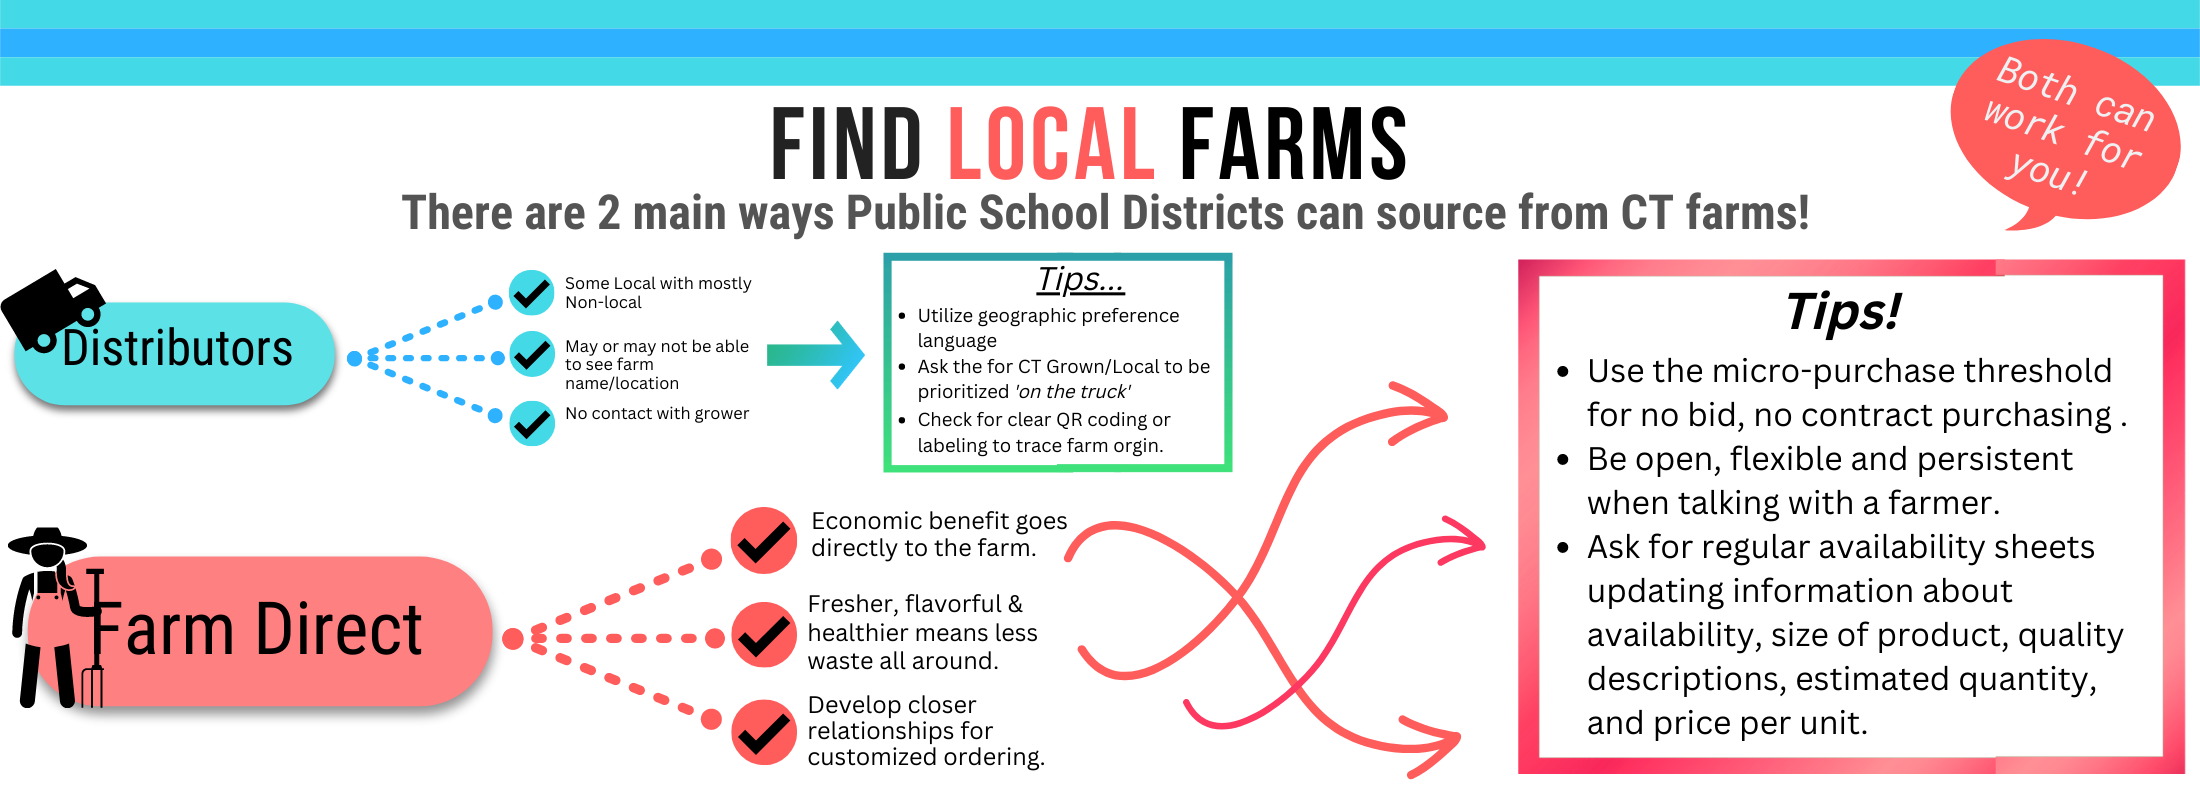 Find farms infographic